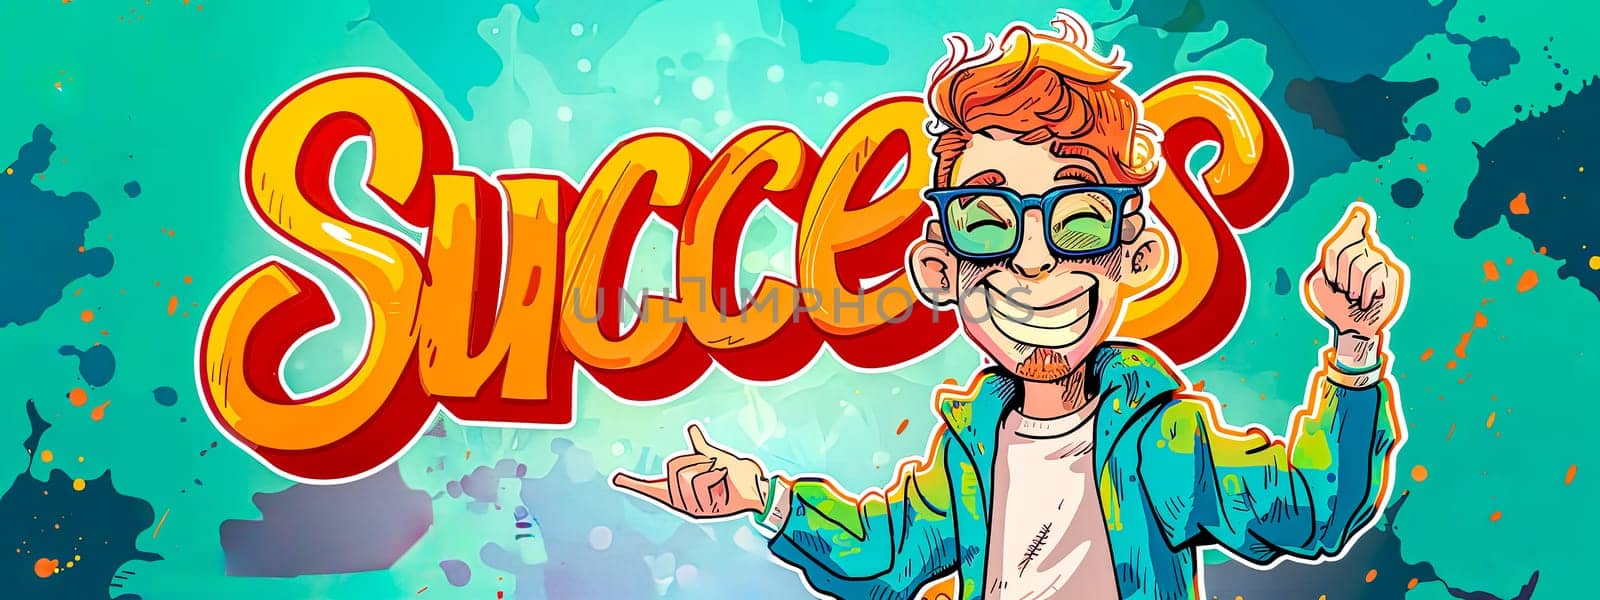 Animated male figure gesturing thumbs up and peace sign with 'success' text and vibrant background